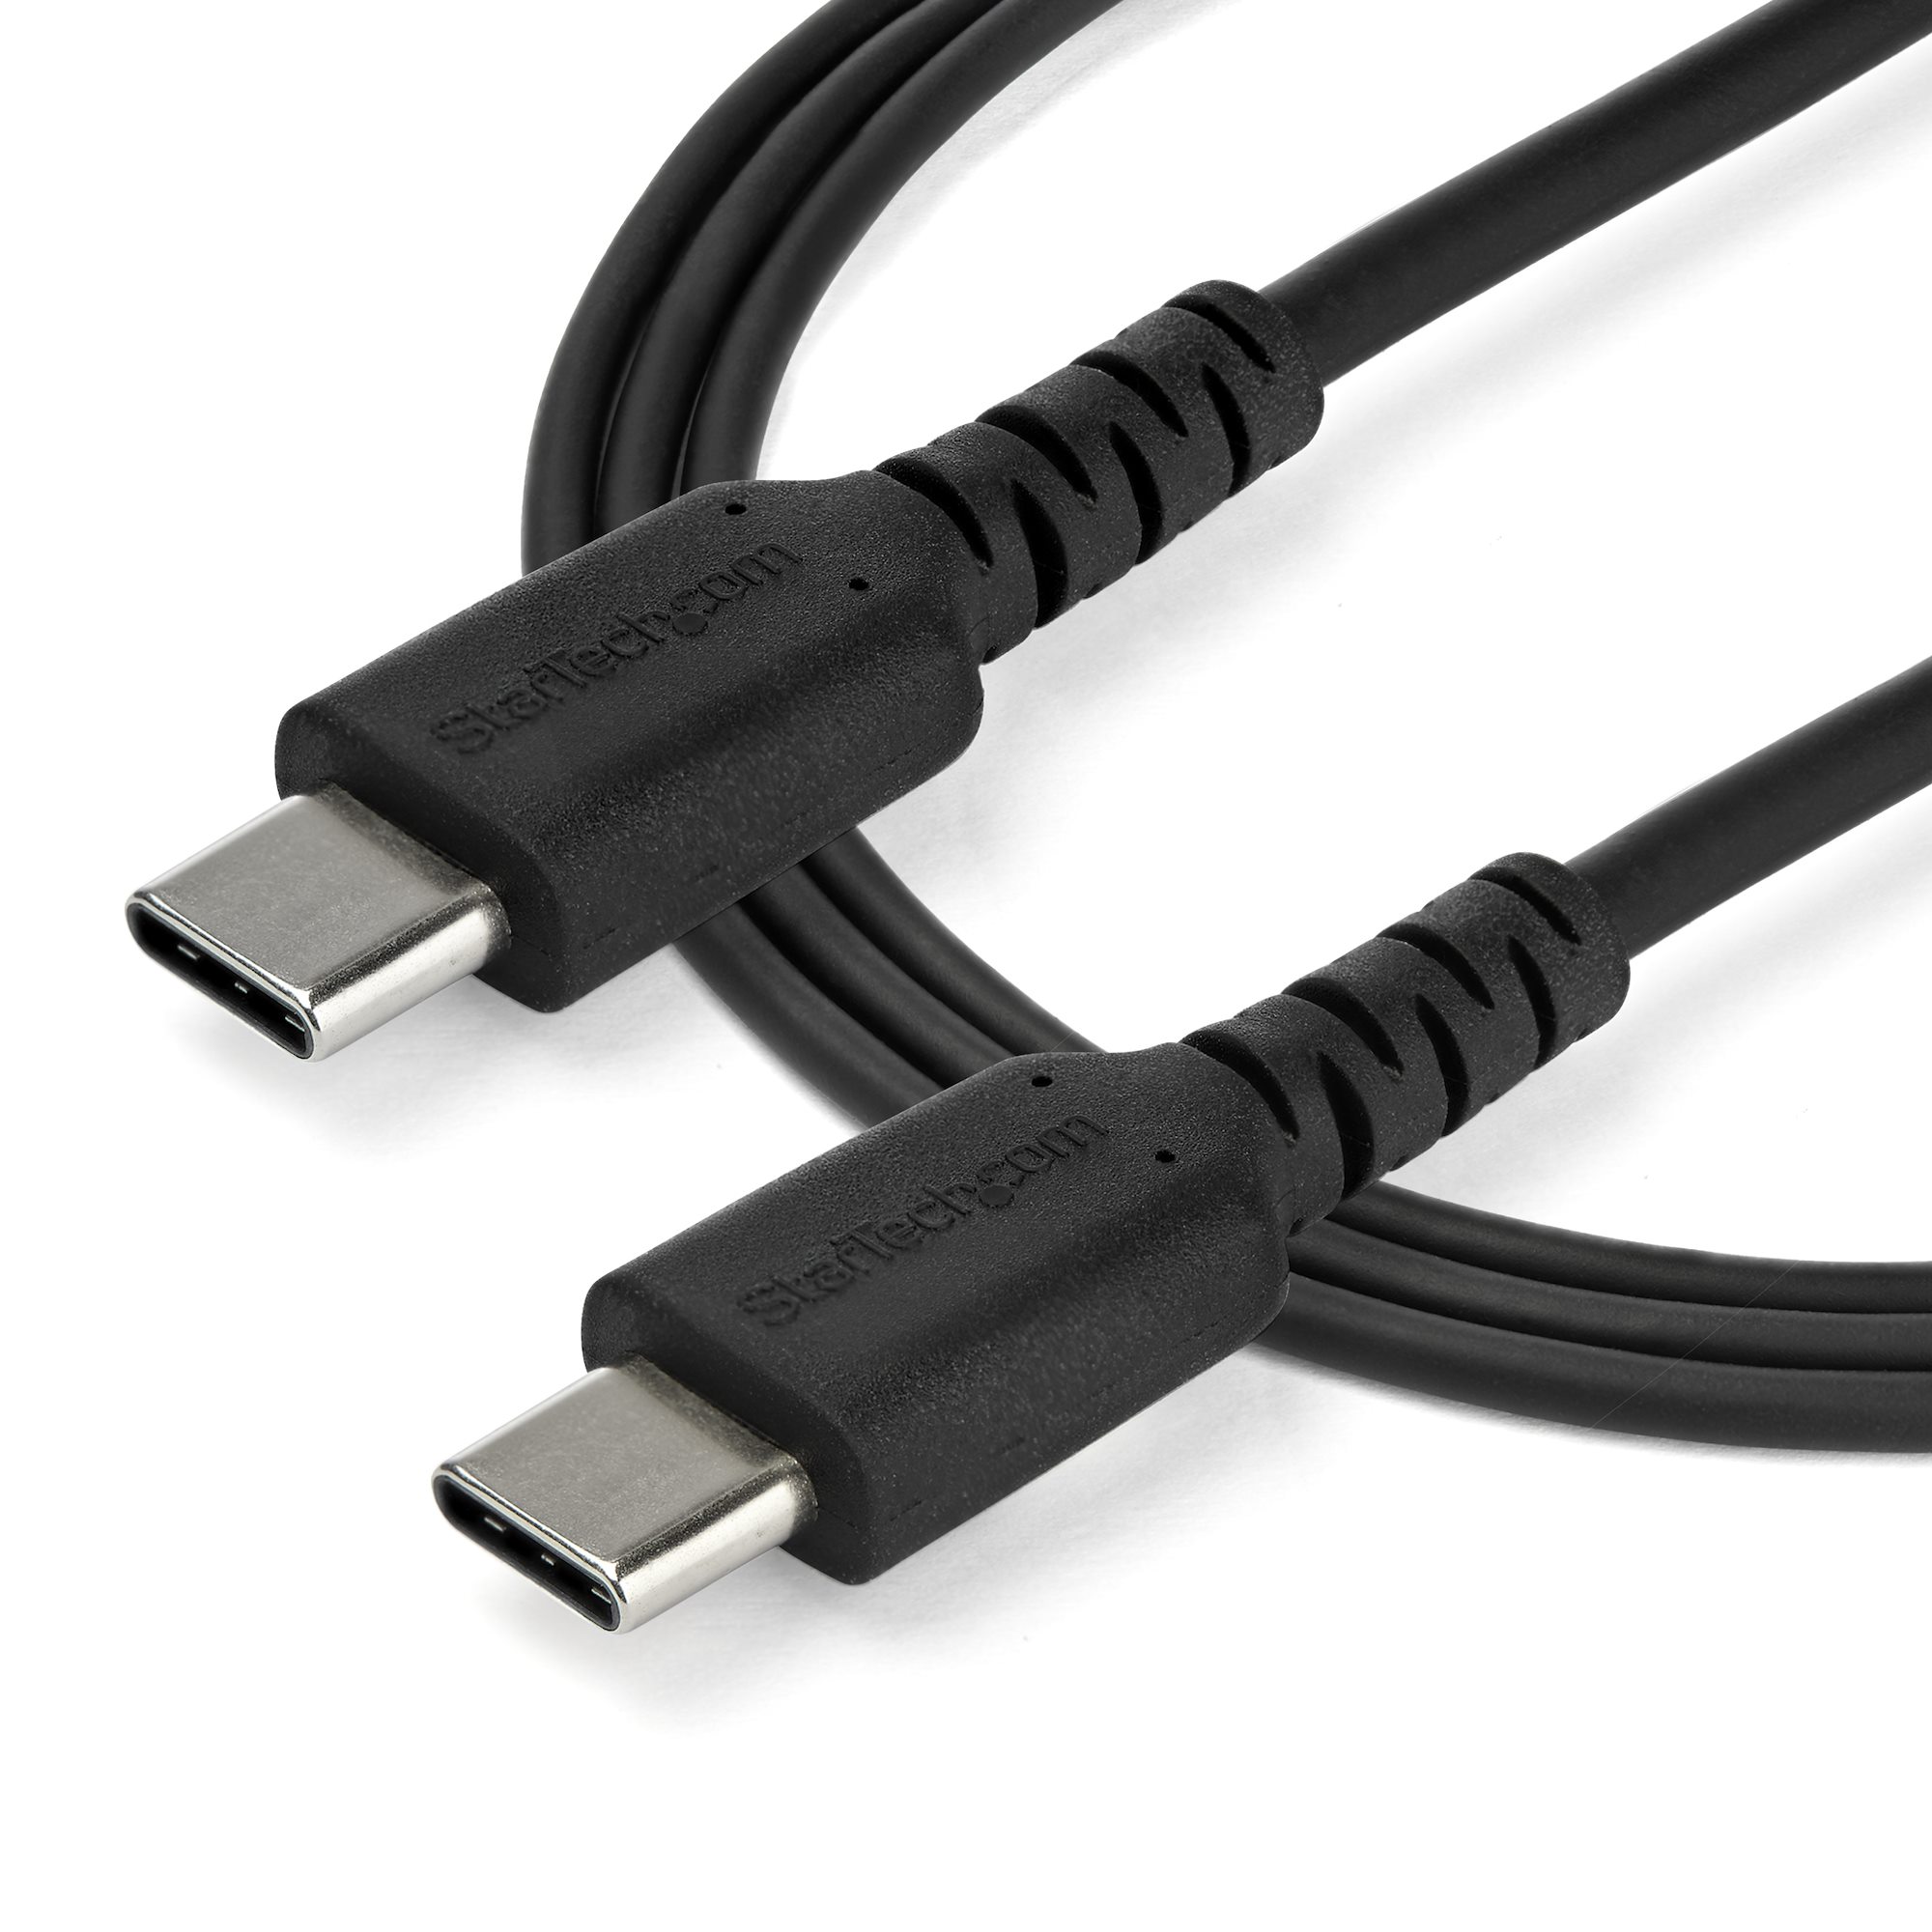 1m USB C Charging Cable Durable Cord 60W - USB-C Cables, Cables